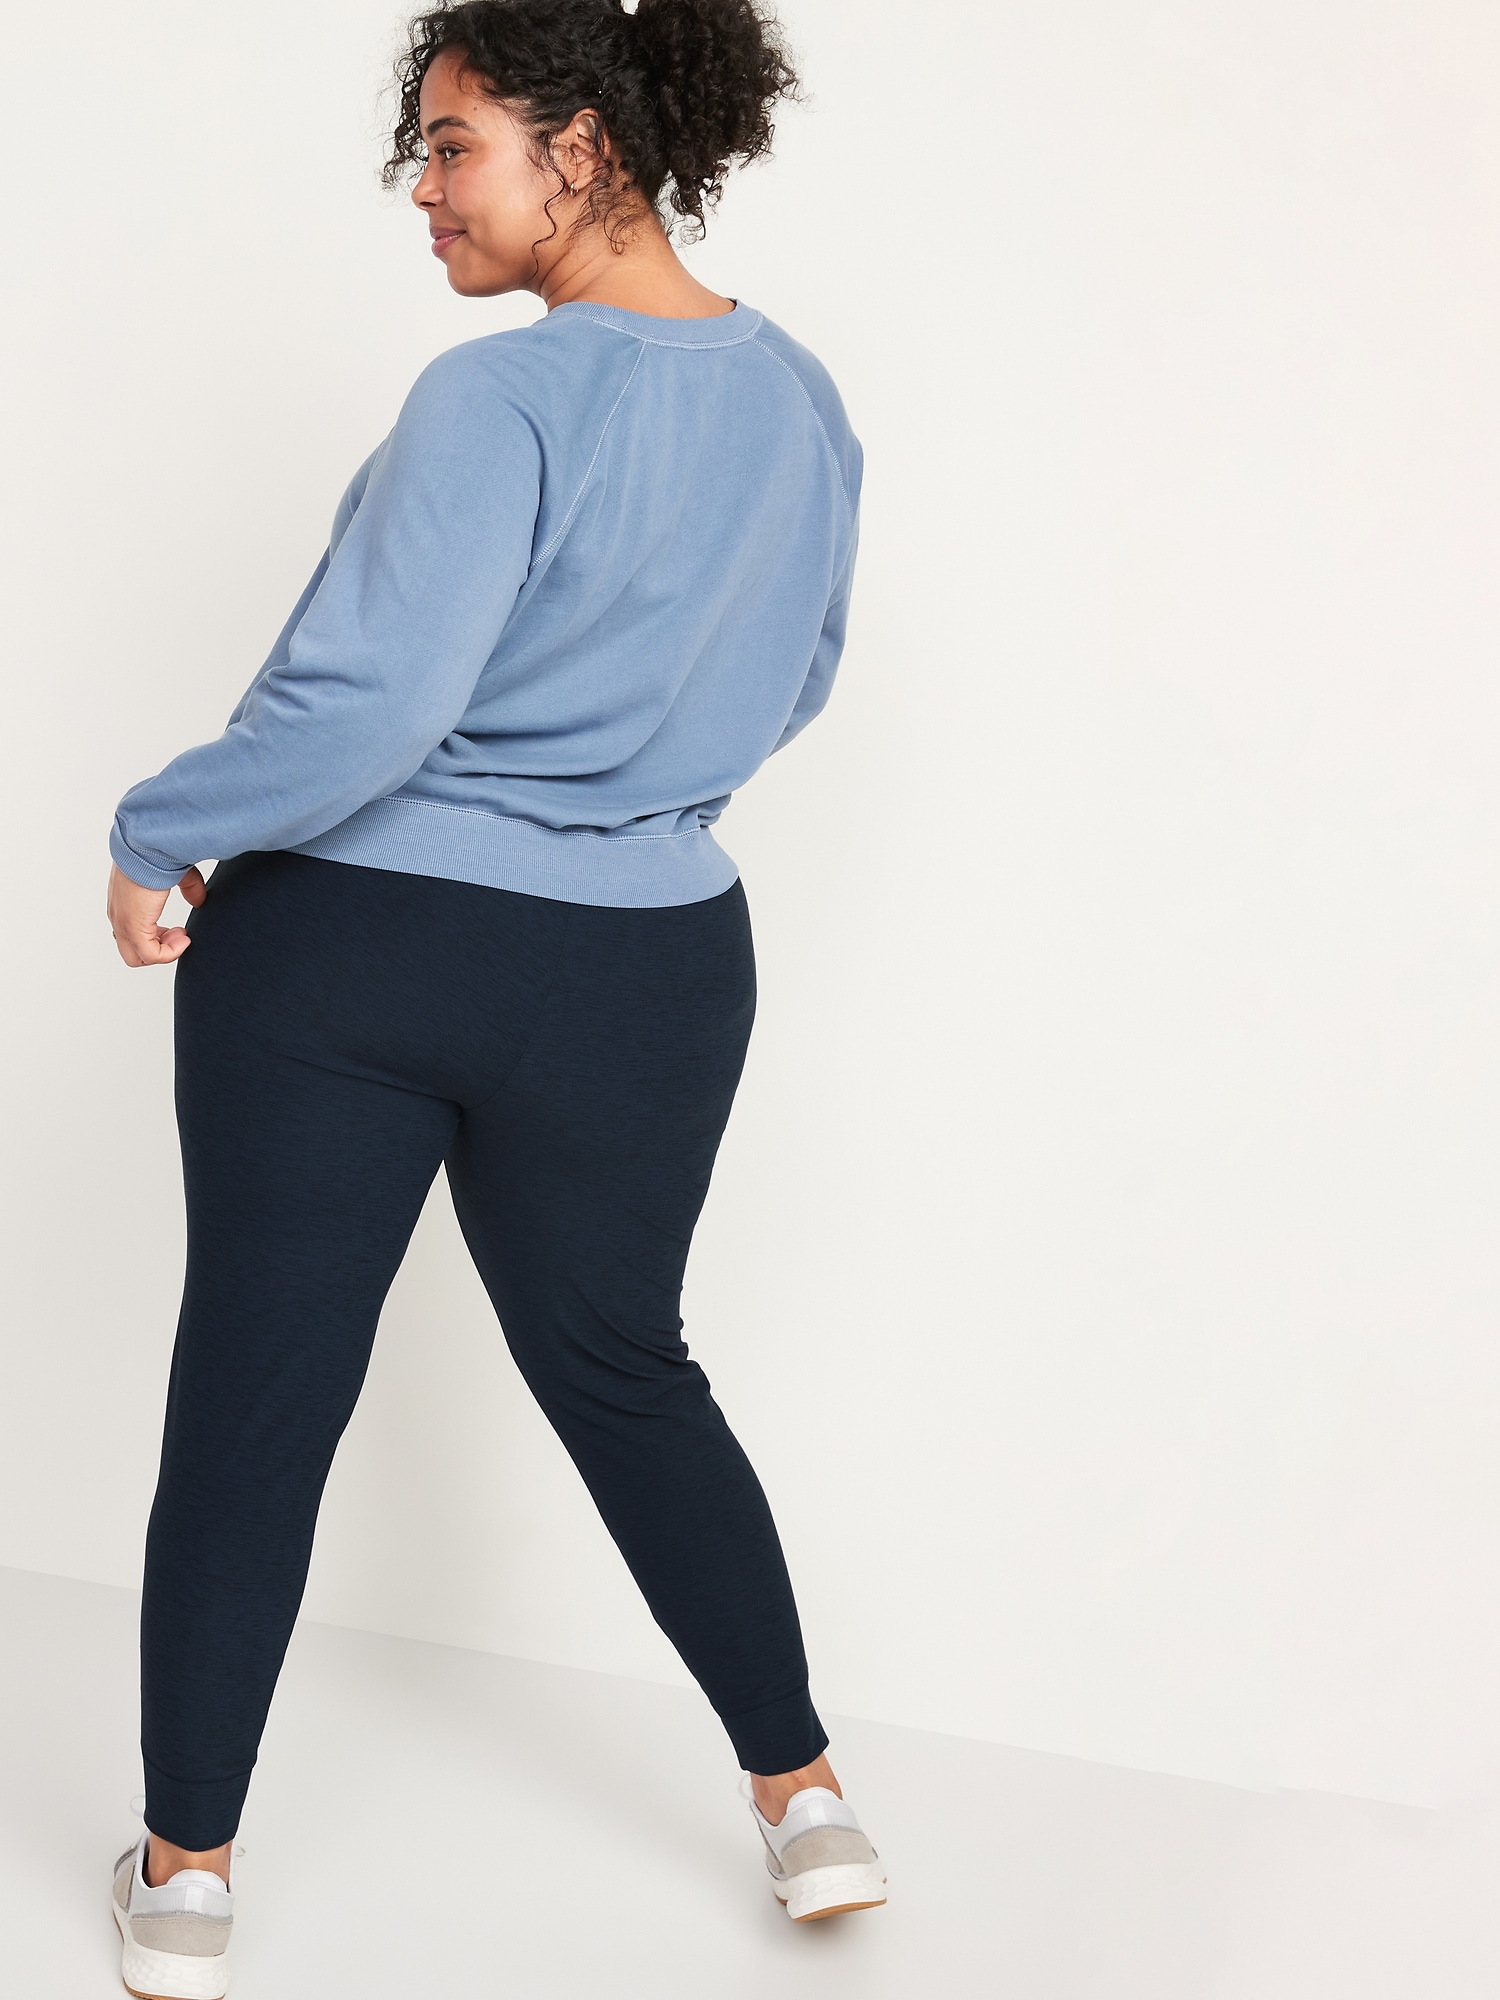 The Mantra Pant (Navy Moon) - Women's Jogger – Vitality Athletic